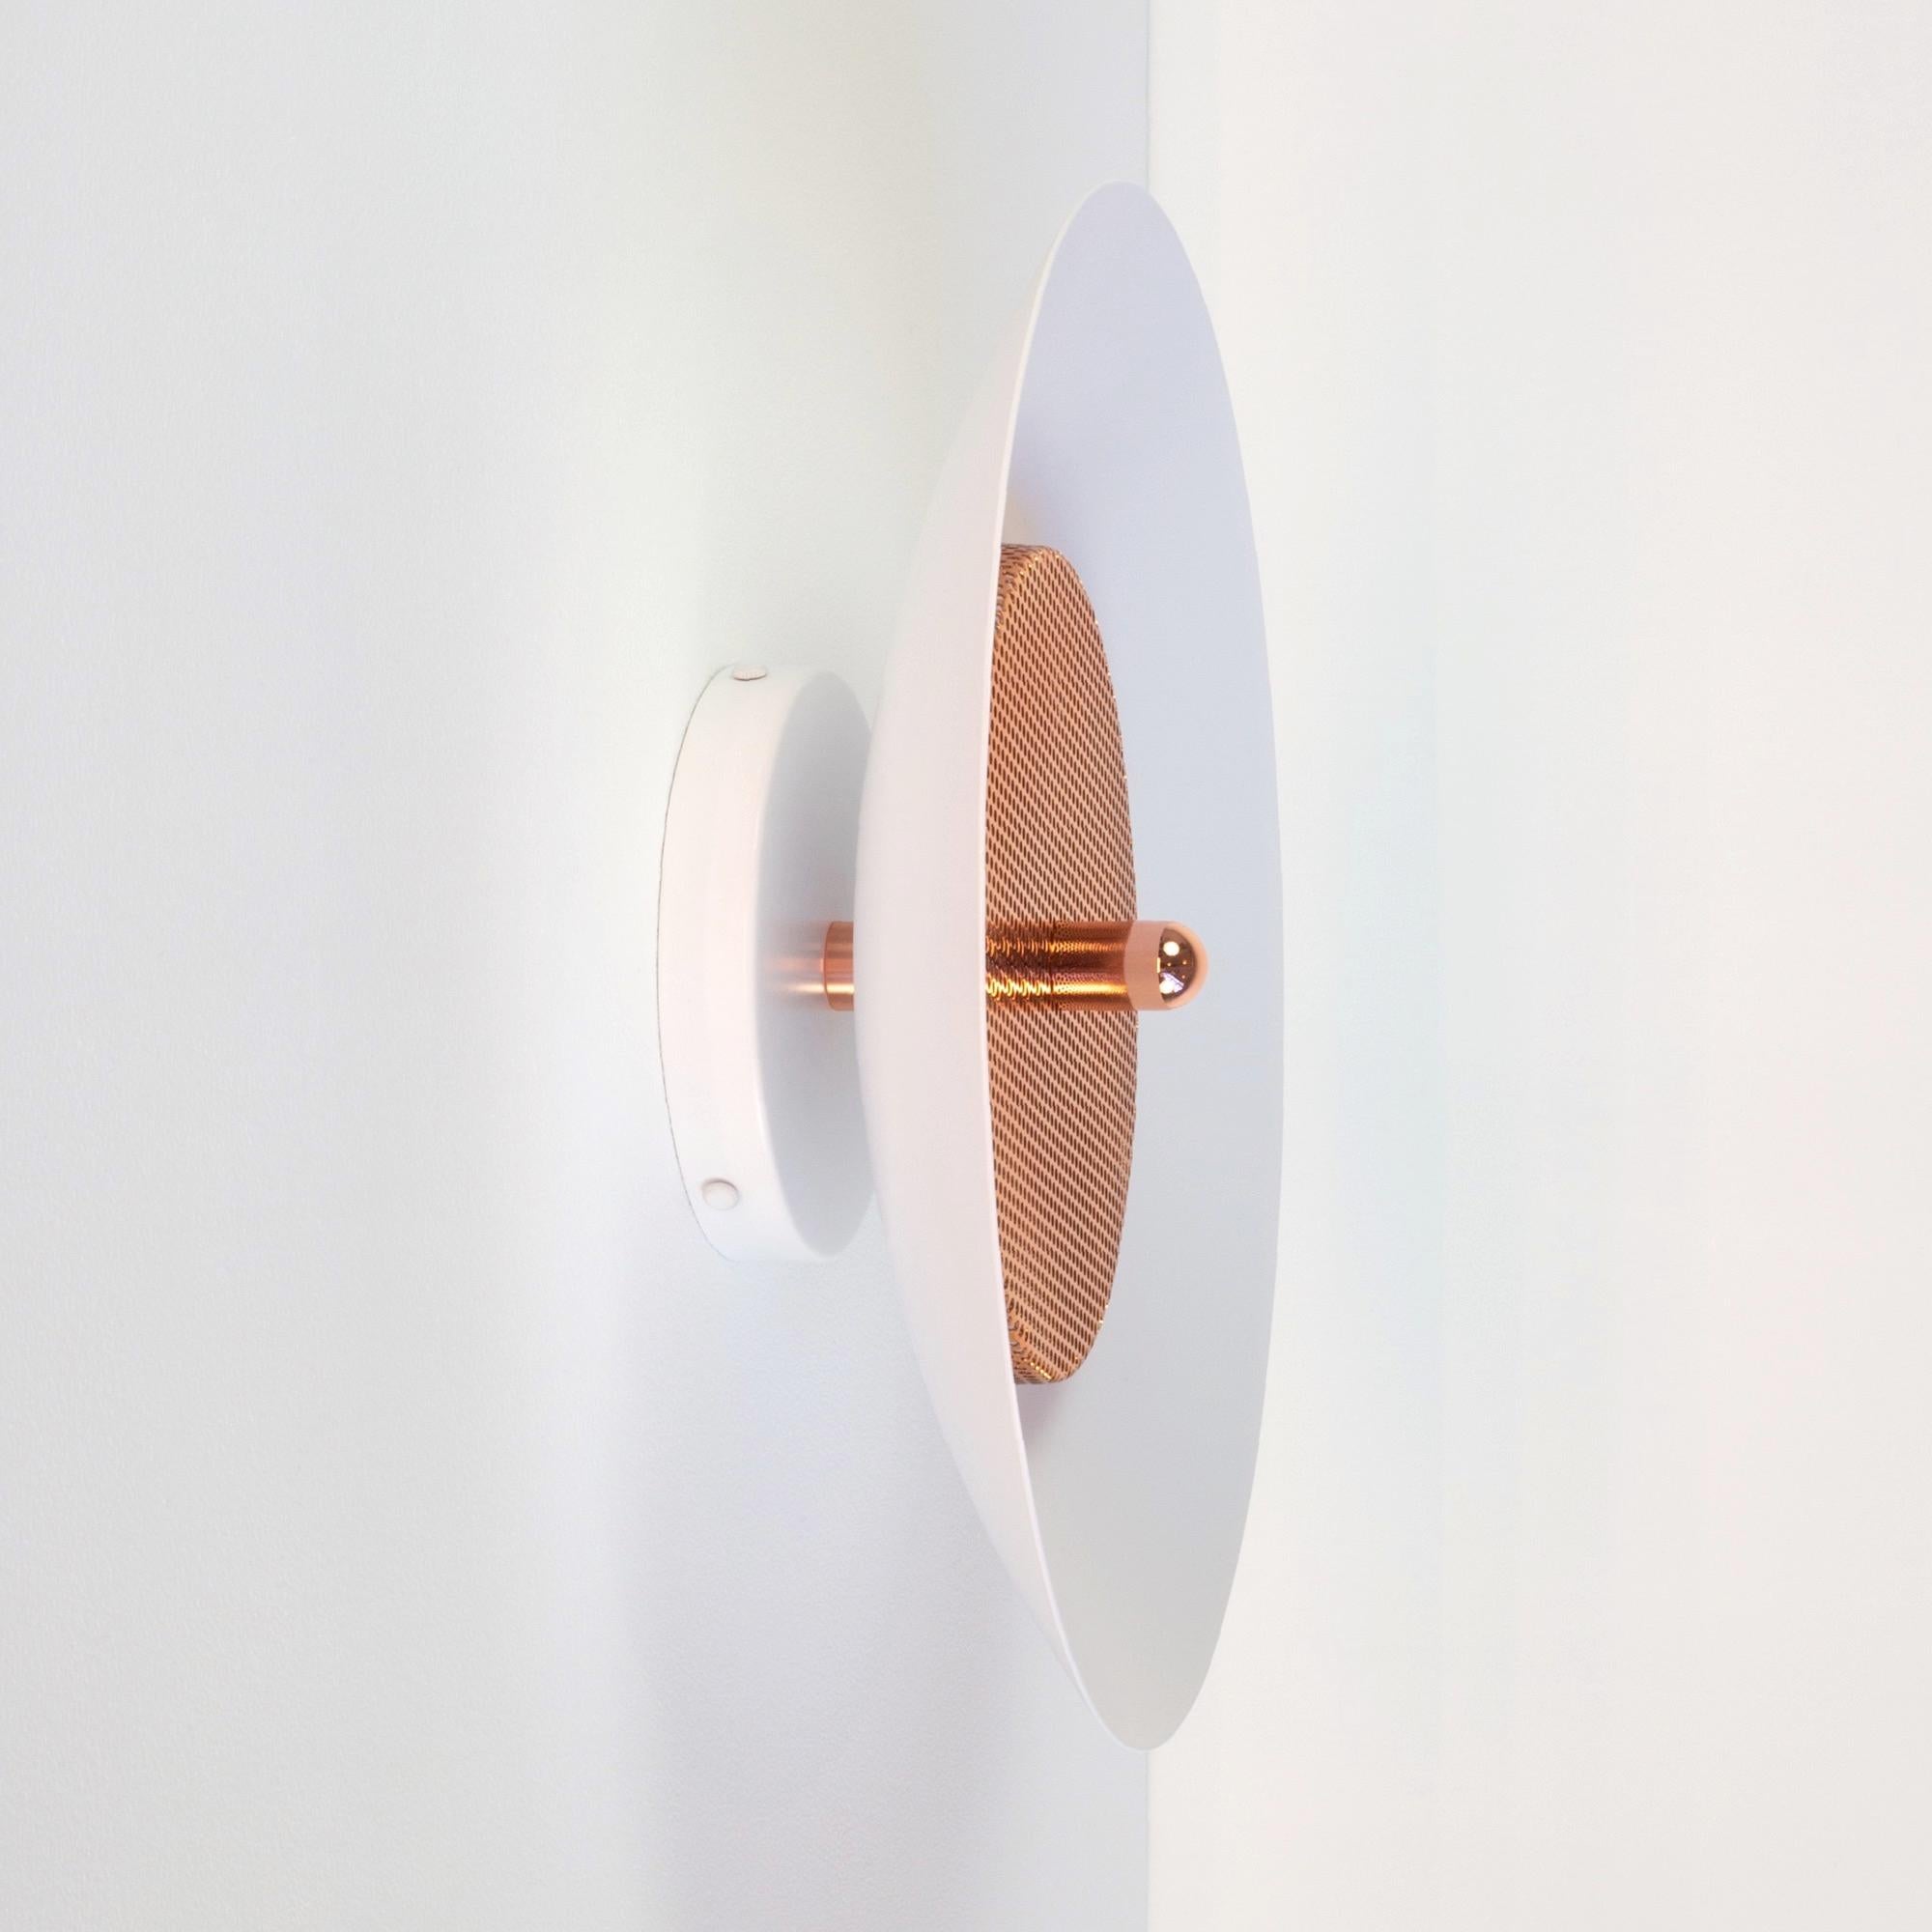 Modern Sconce or Flush Mount. Composed of a spun metal shade that reflects light filtered through a perforated metal diffuser, the subtle warmth of the signal sconce is perfectly balanced by it’s striking form. With their refined lines and numerous